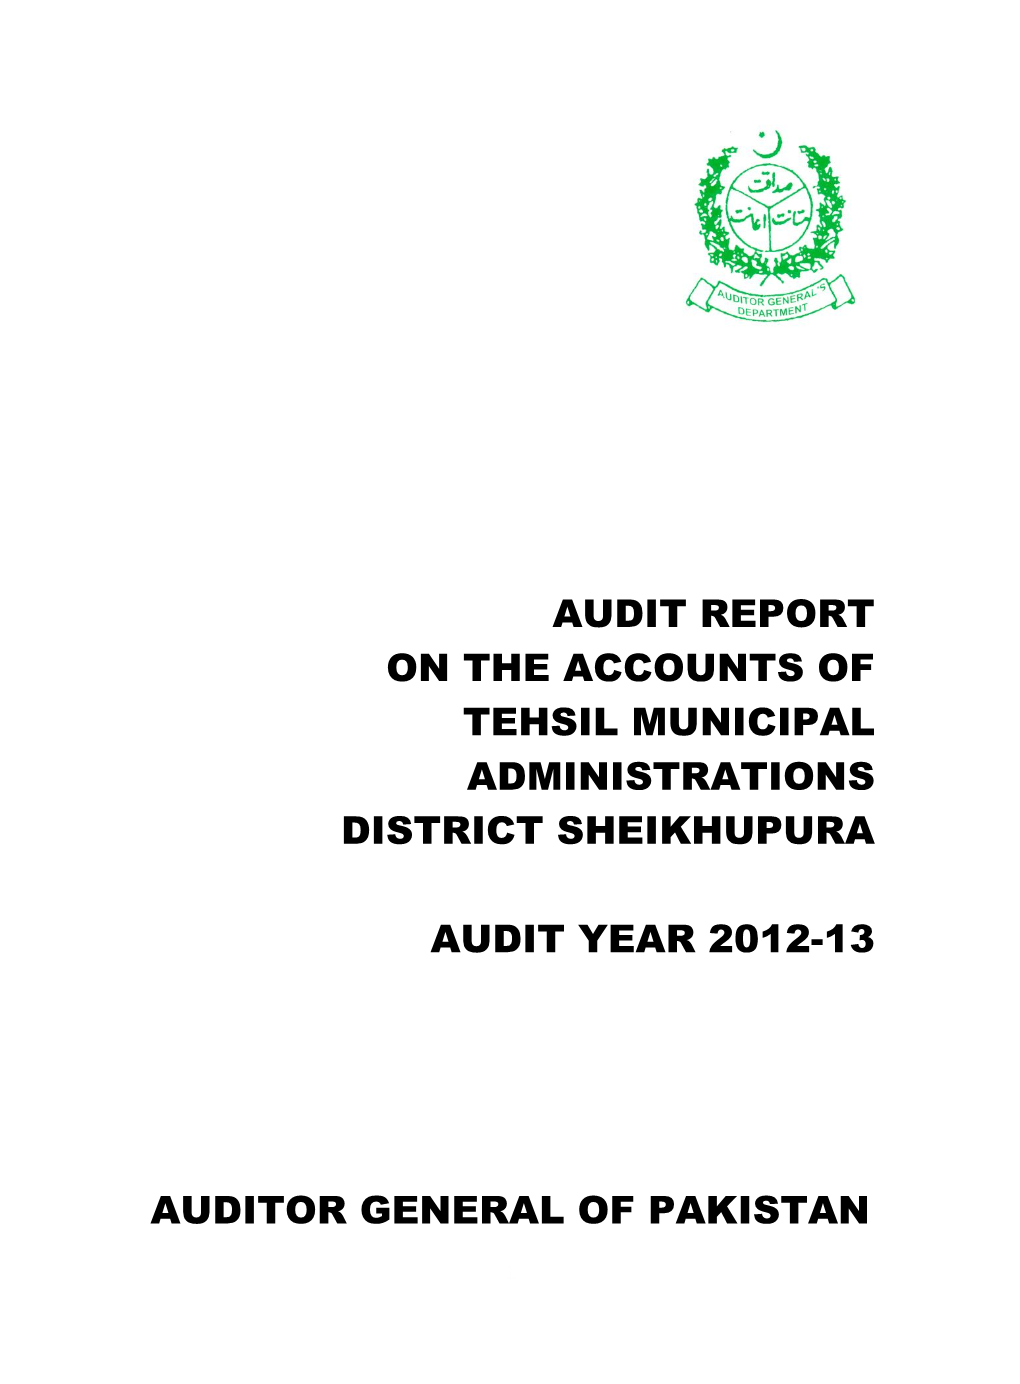 Audit Report on the Accounts of Tehsil Municipal Administrations District Sheikhupura